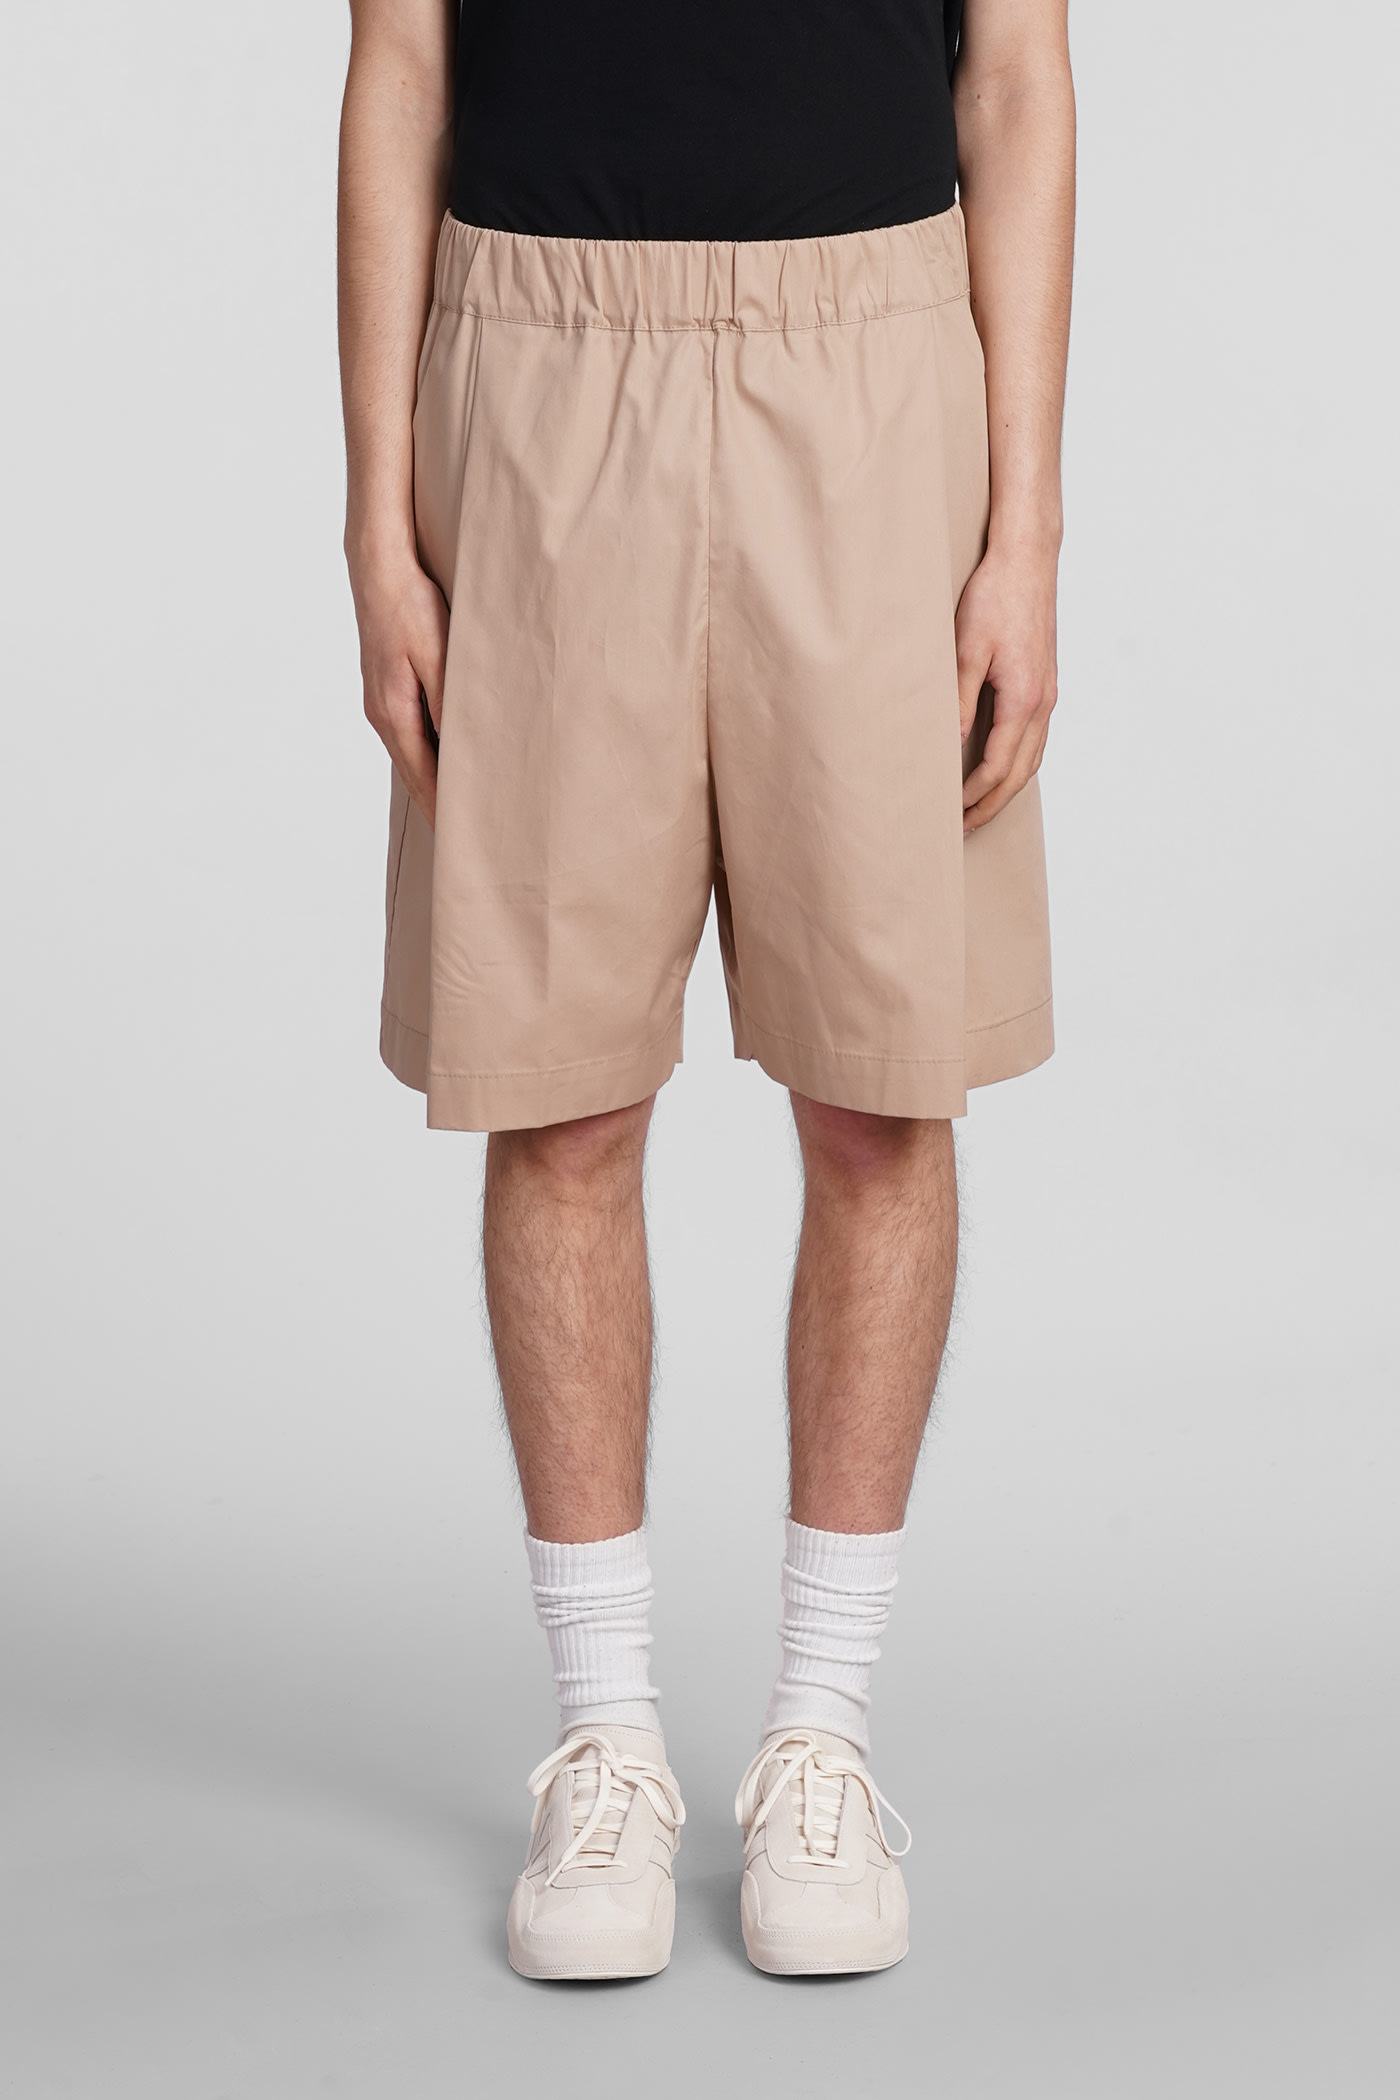 Shorts In Camel Cotton